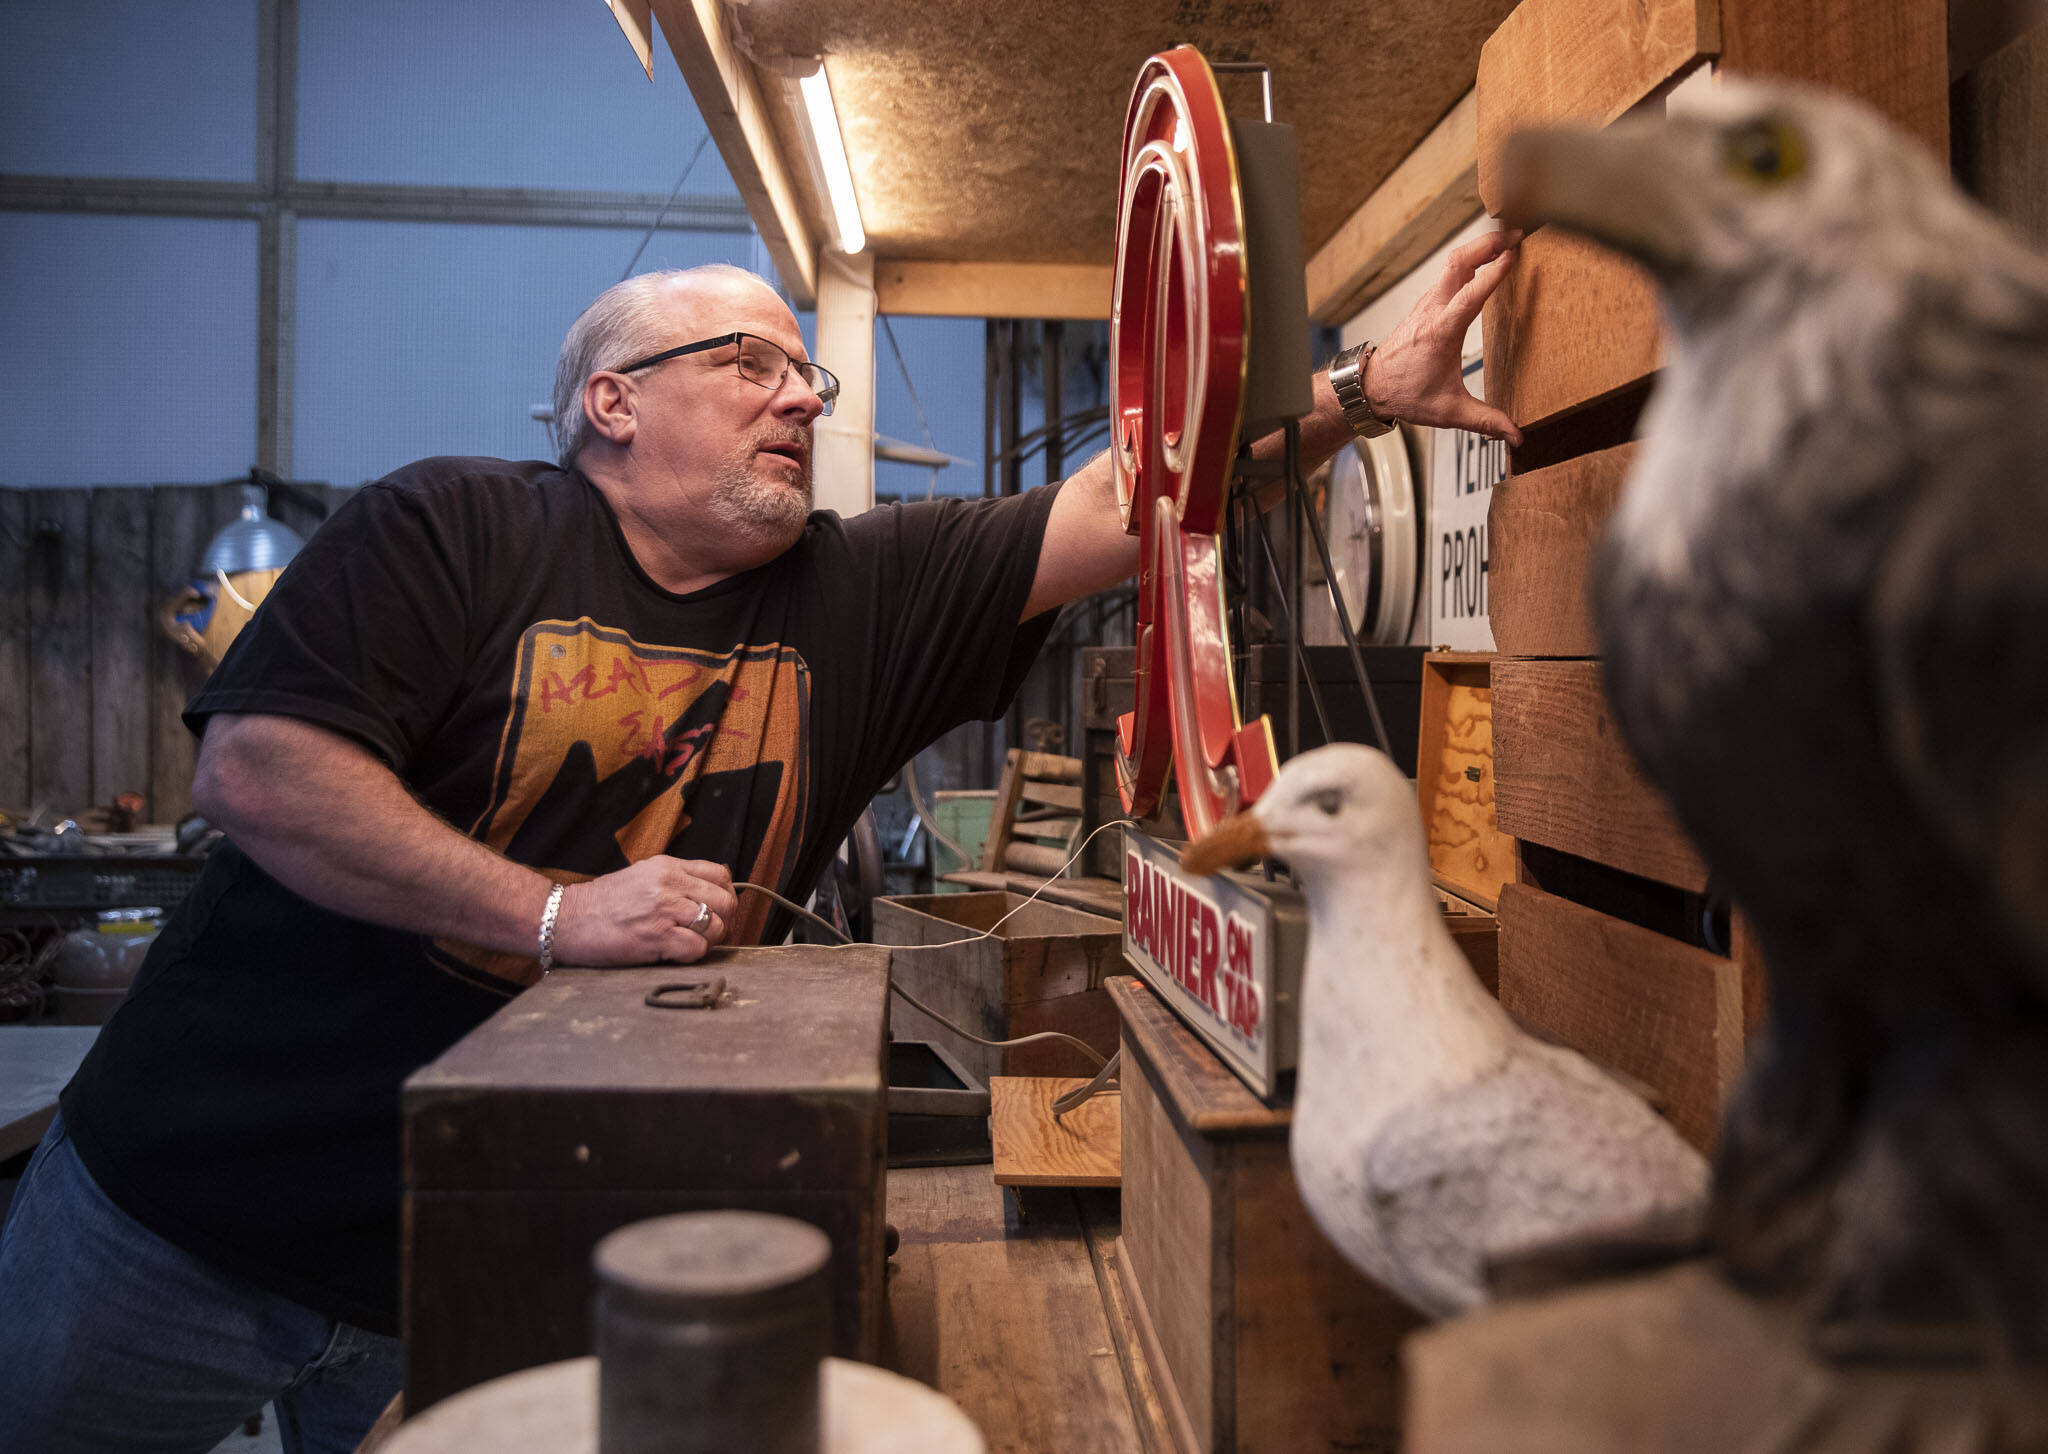 Bryan McClimans adjusts a display inside his store Second Chance Antiques on Thursday, in Everett. (Olivia Vanni / The Herald)